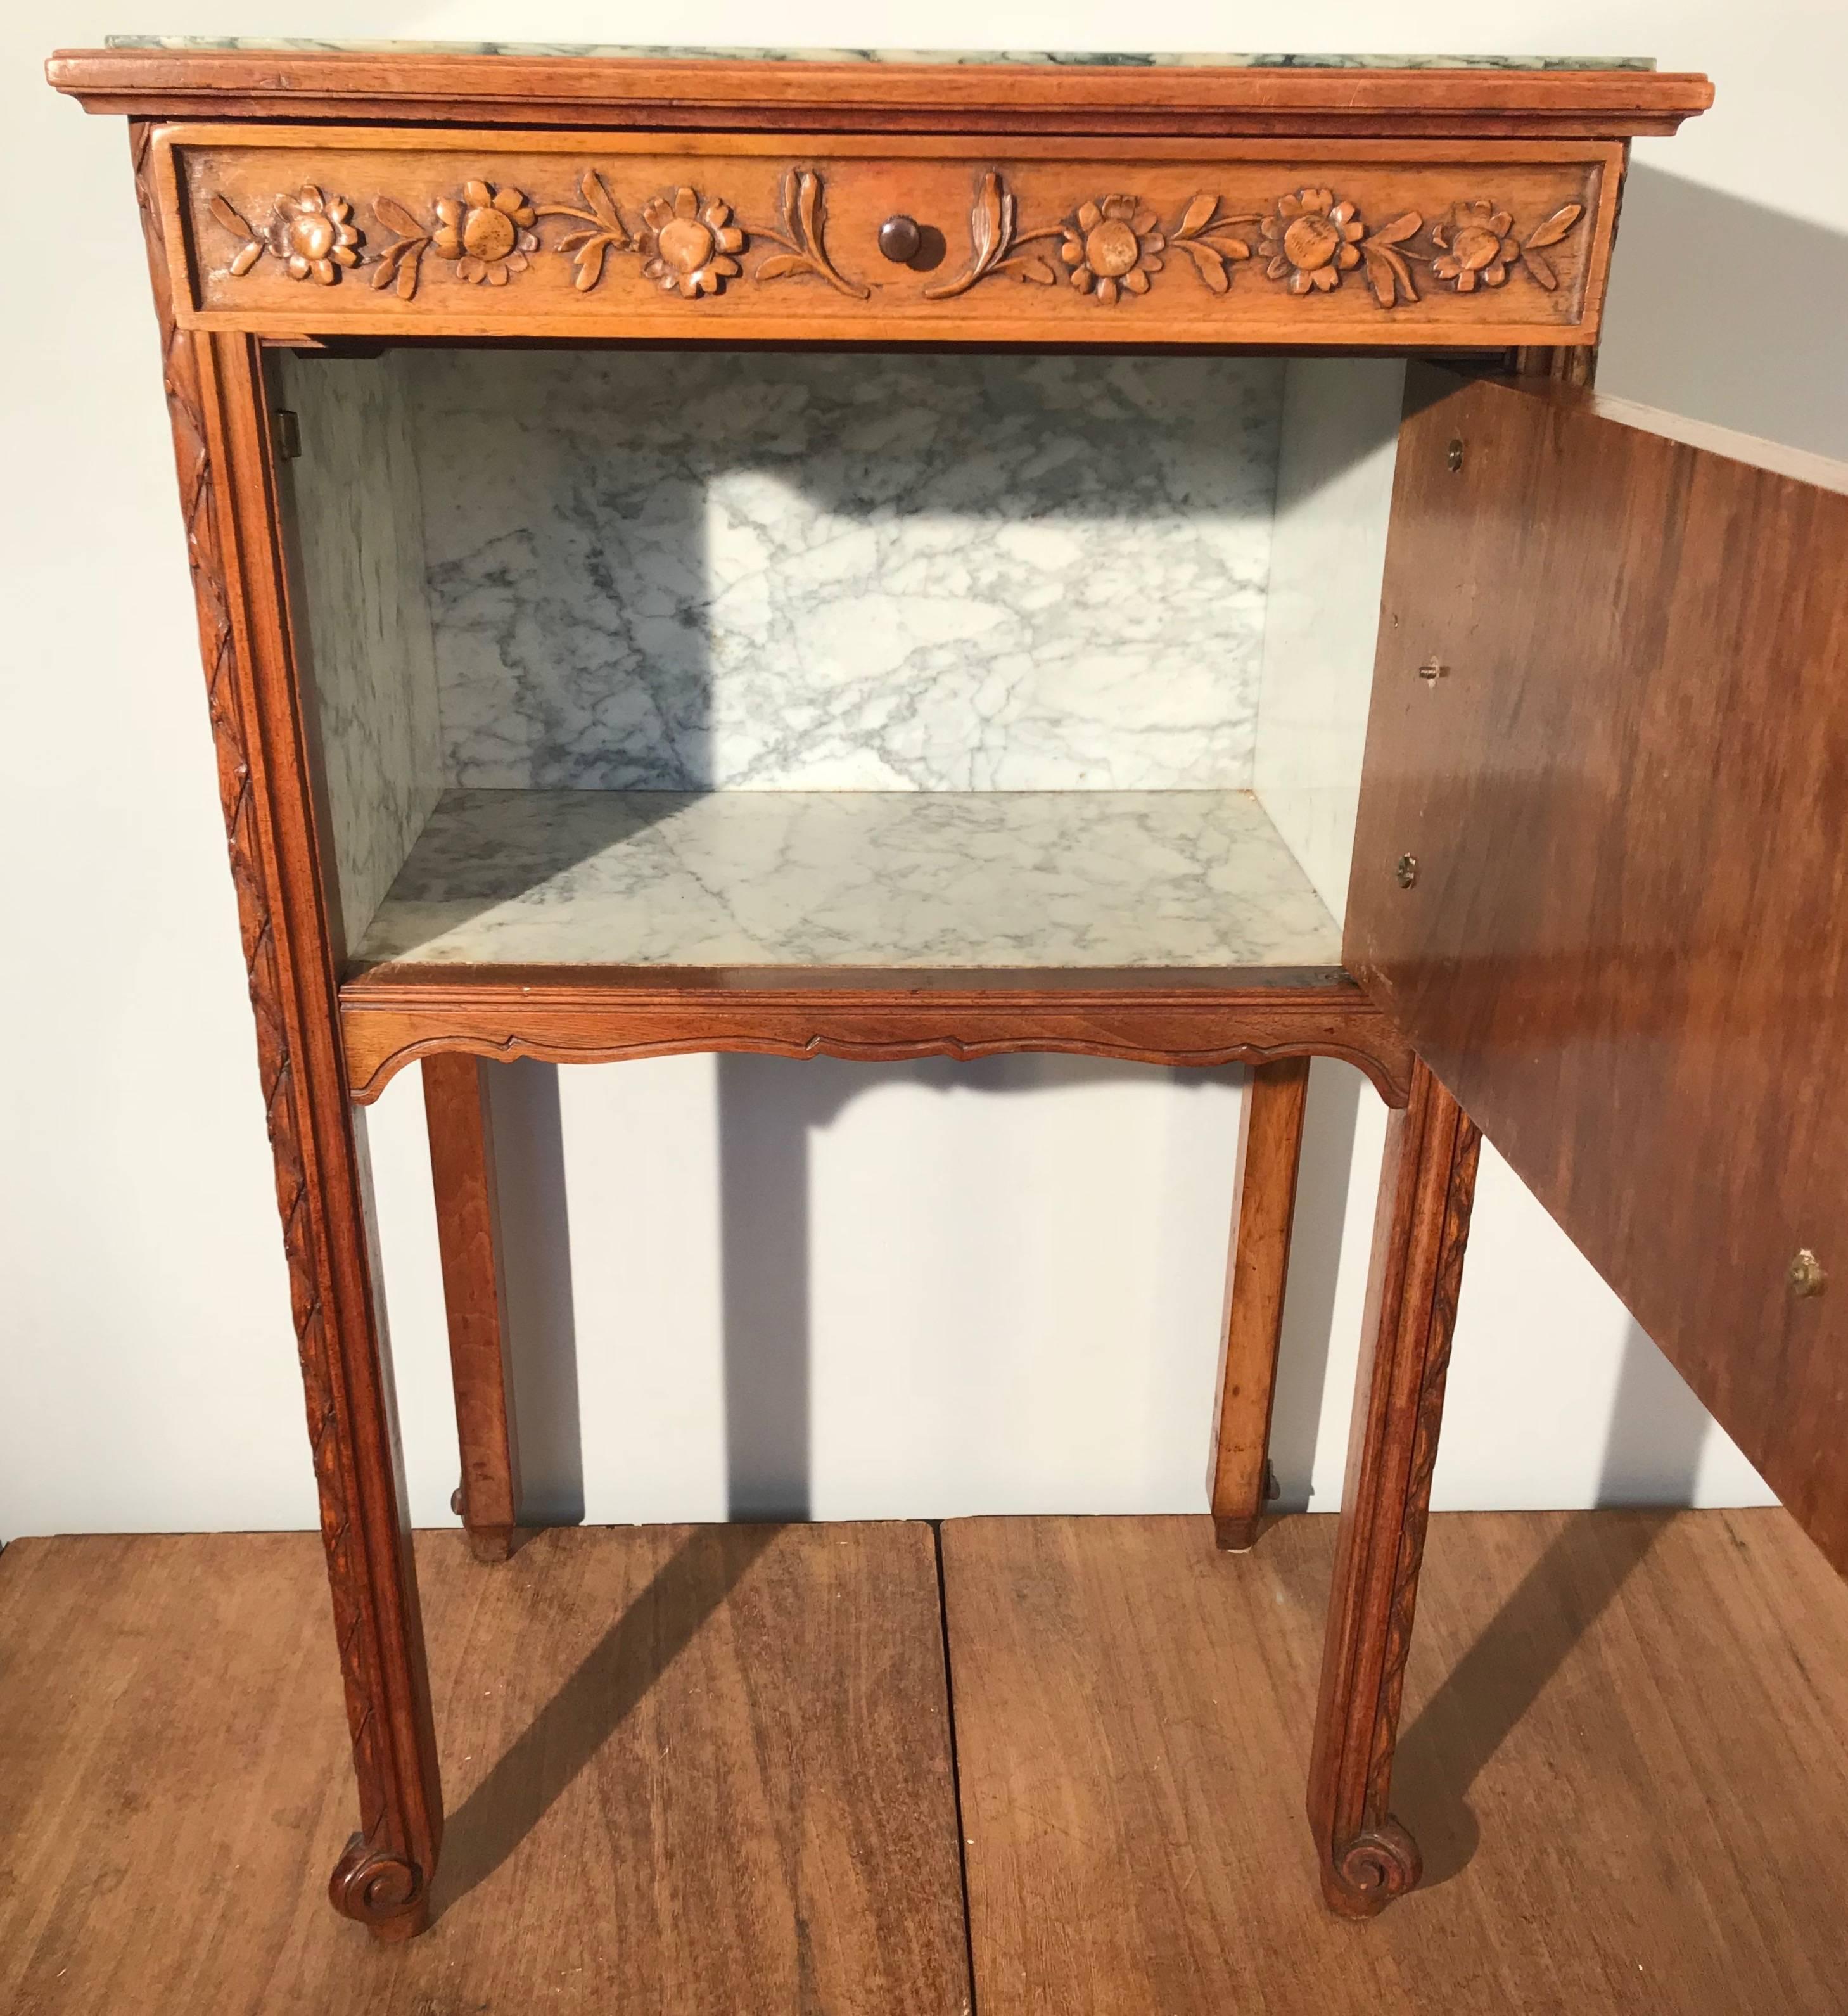 1900s French Hand-Carved Nutwood Side Table / Cabinet with Marble Top & Interior 1